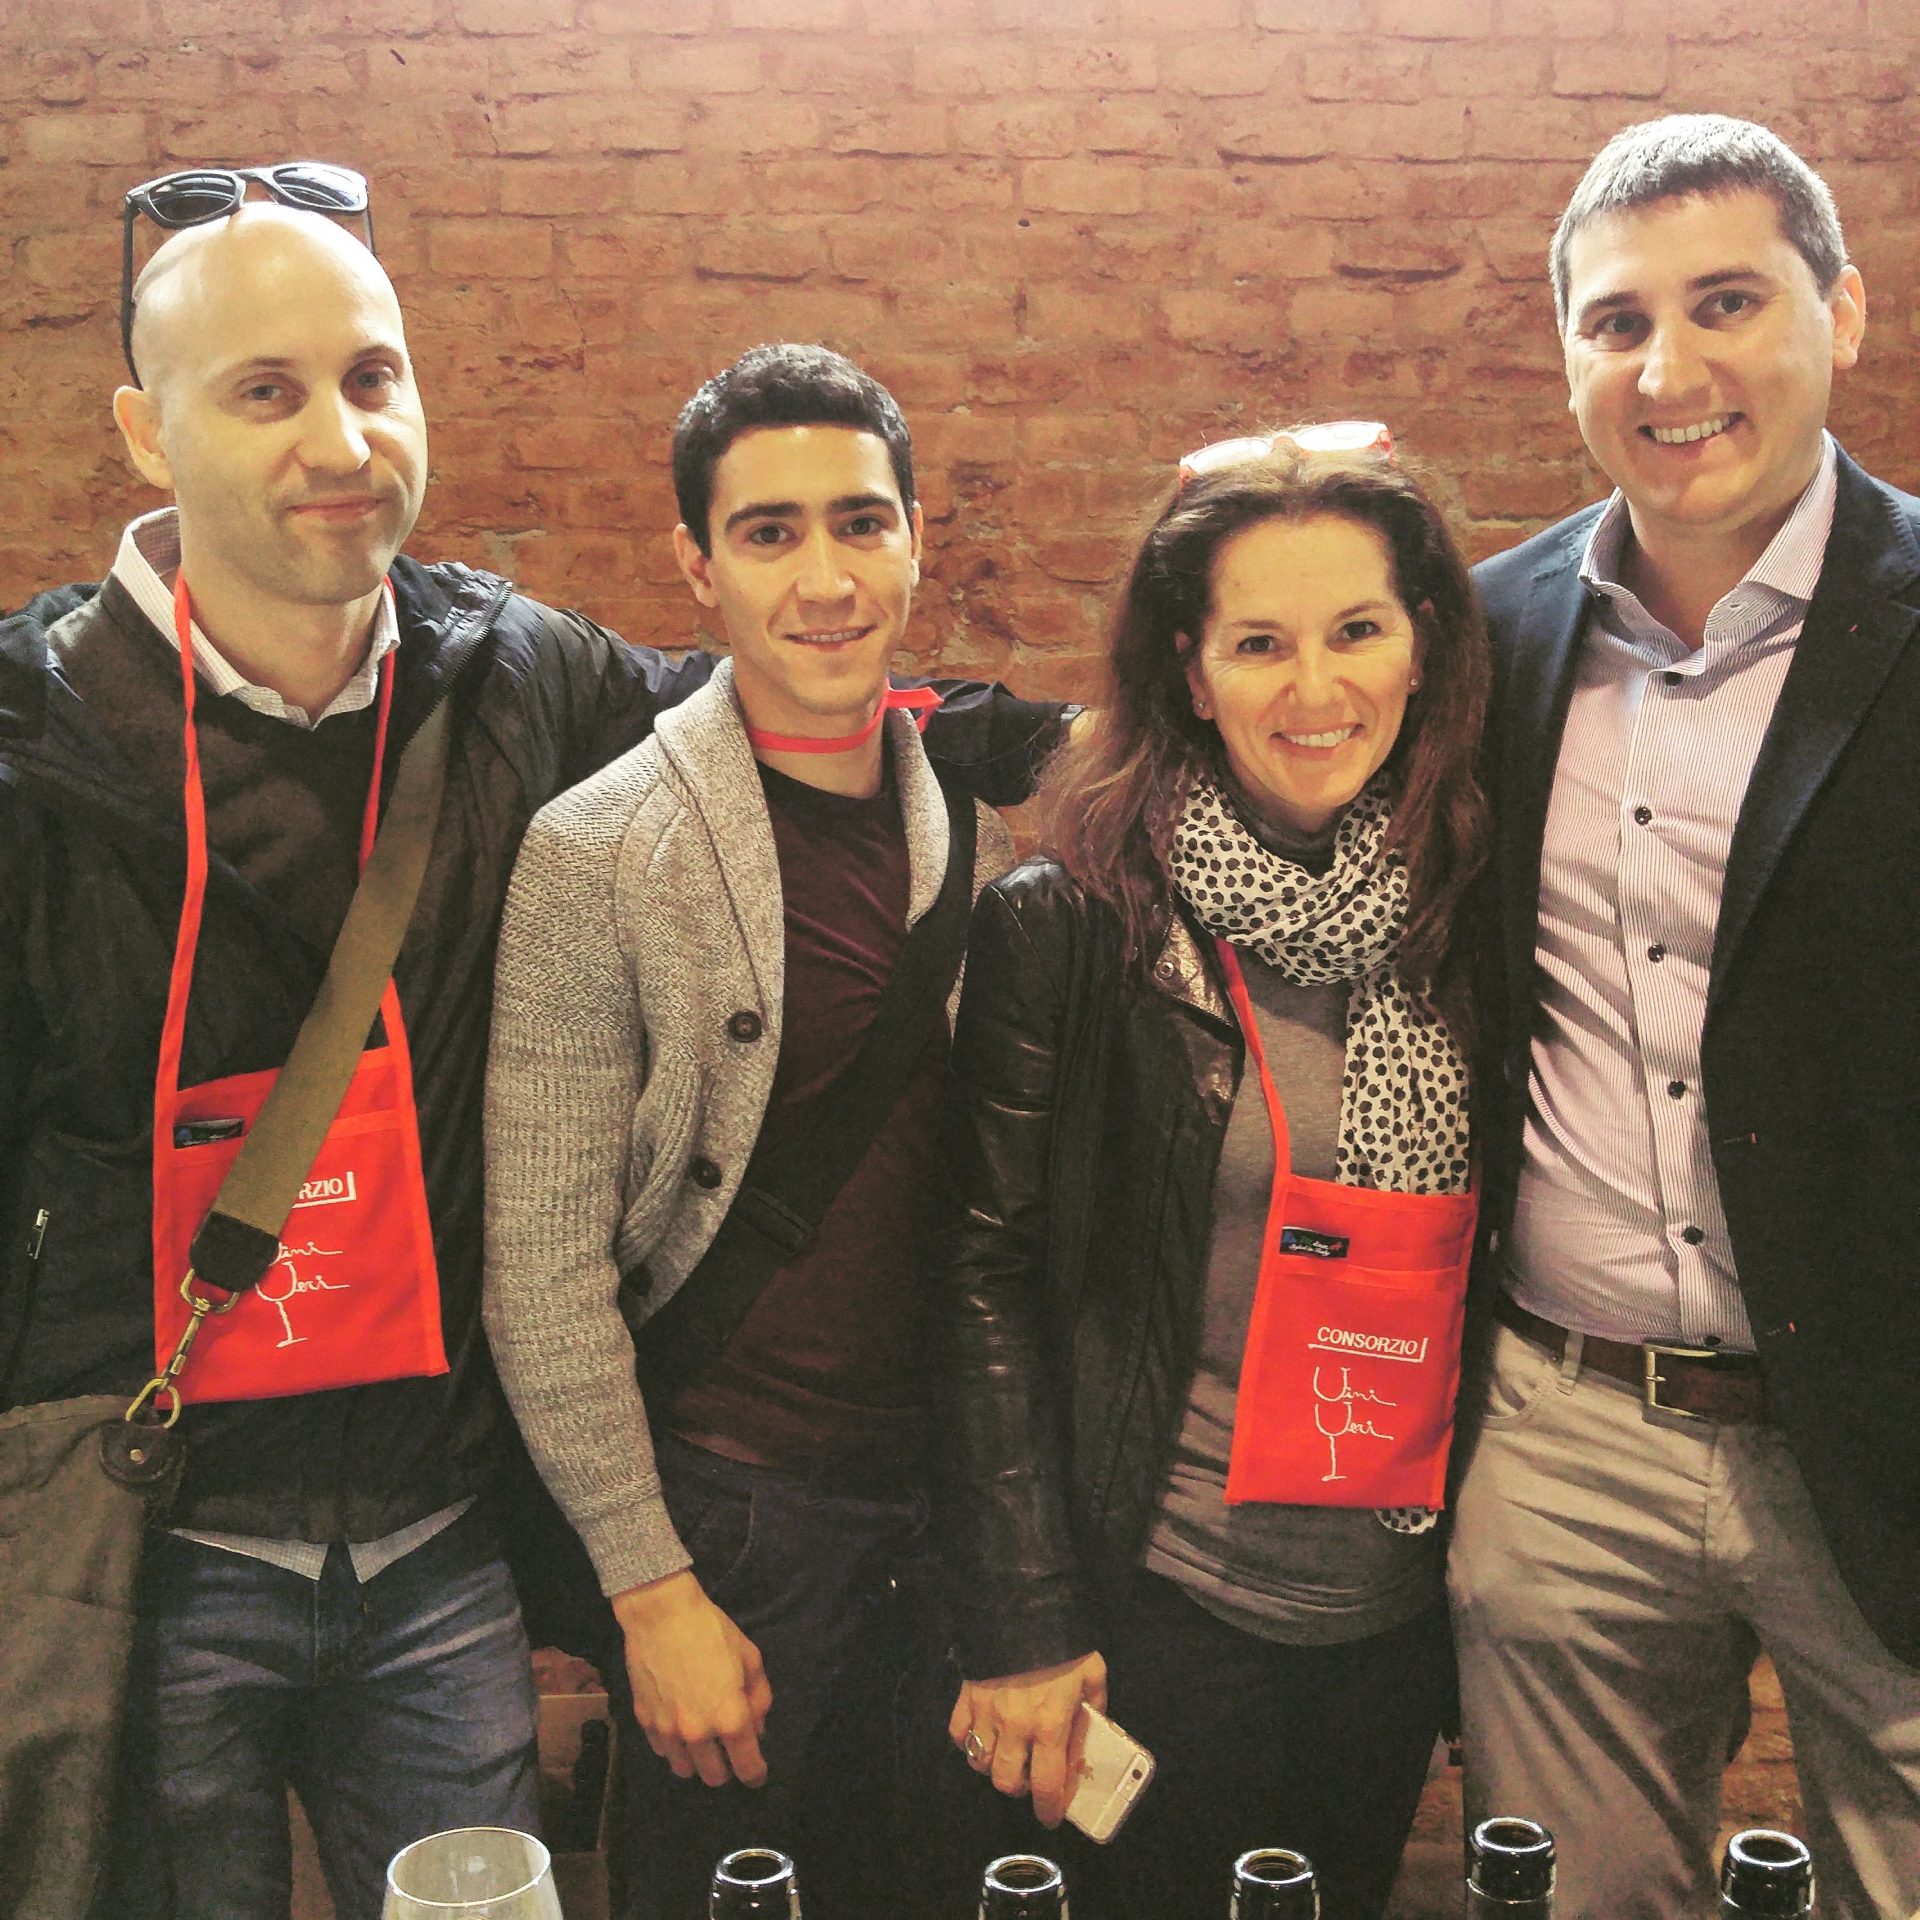 Gint, David (sommelier from Los Angeles), Anna, and Stefano Bensa (La Castellada) at the Viniveri wine festival (all natural wine event)